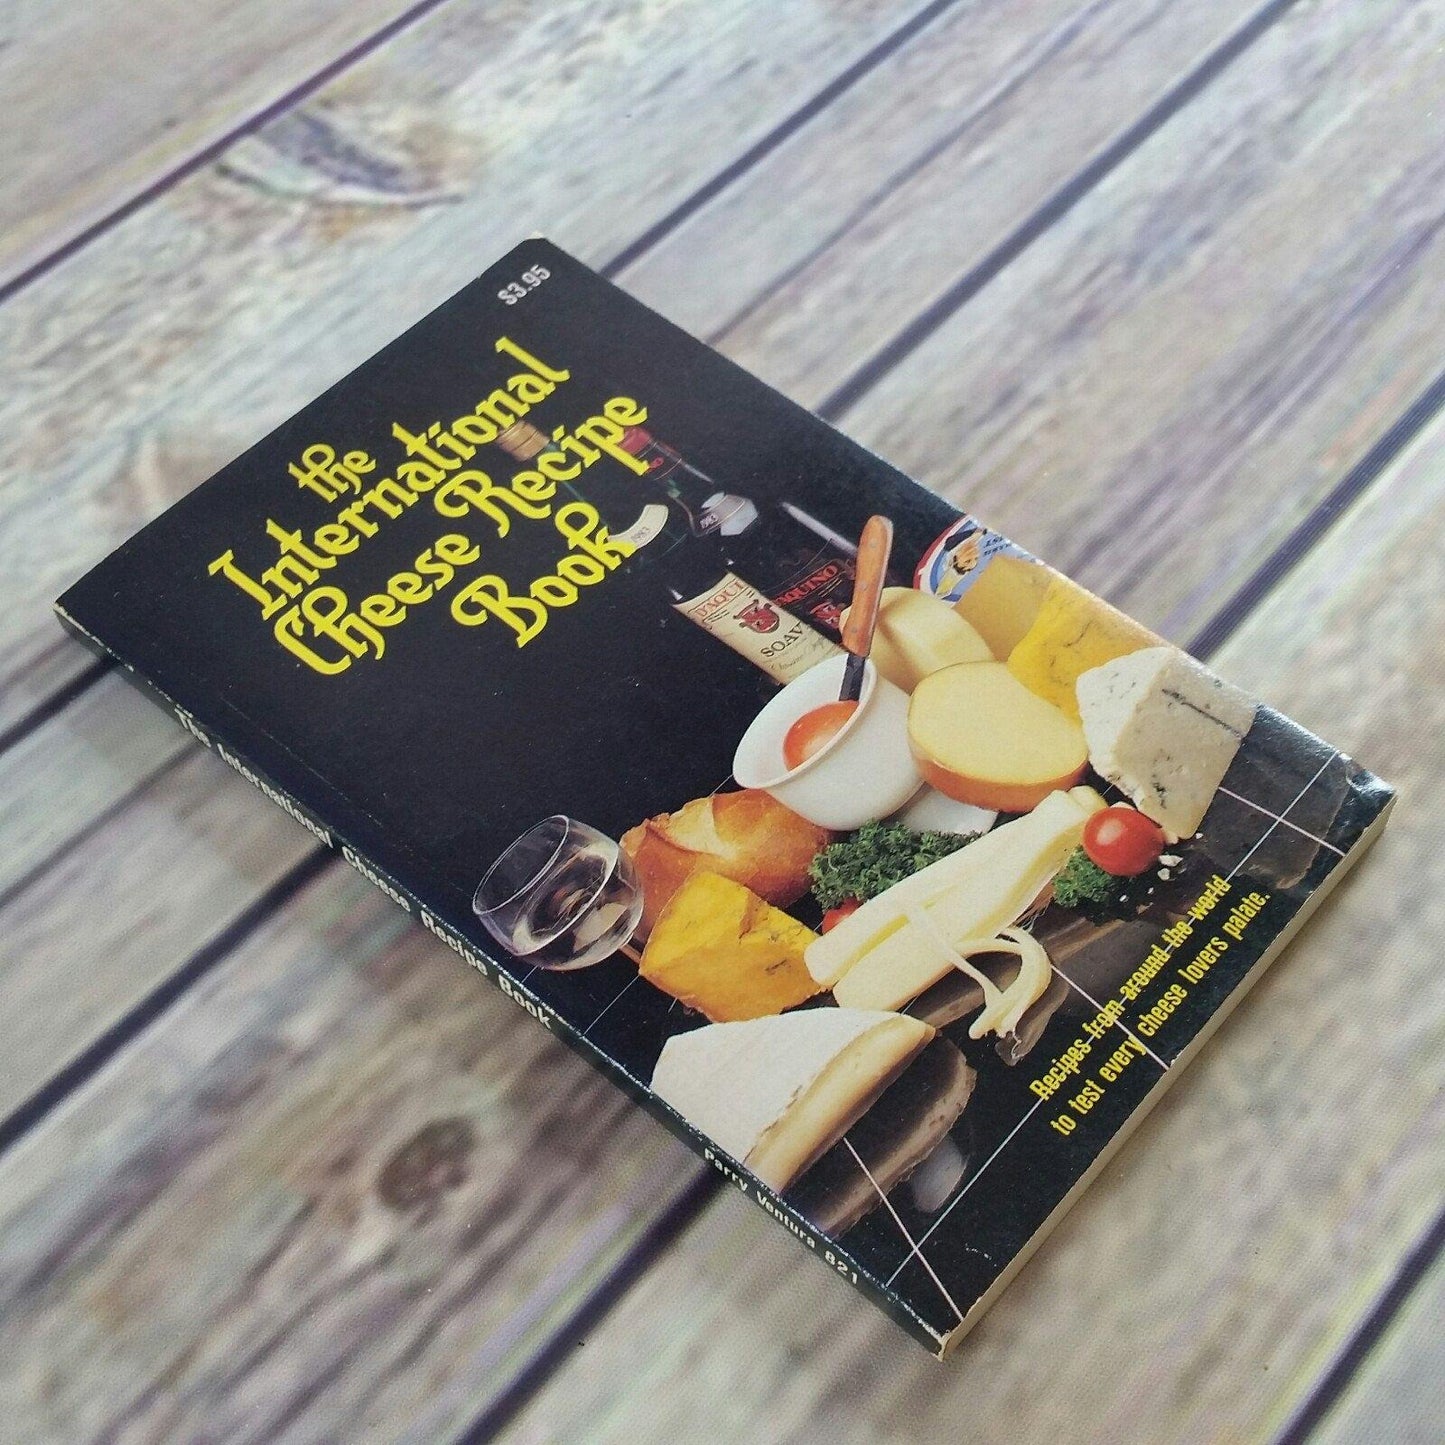 Vintage Cookbook The International Cheese Recipe Book 1981 Paperback Recipes From Around the World Evor Parry